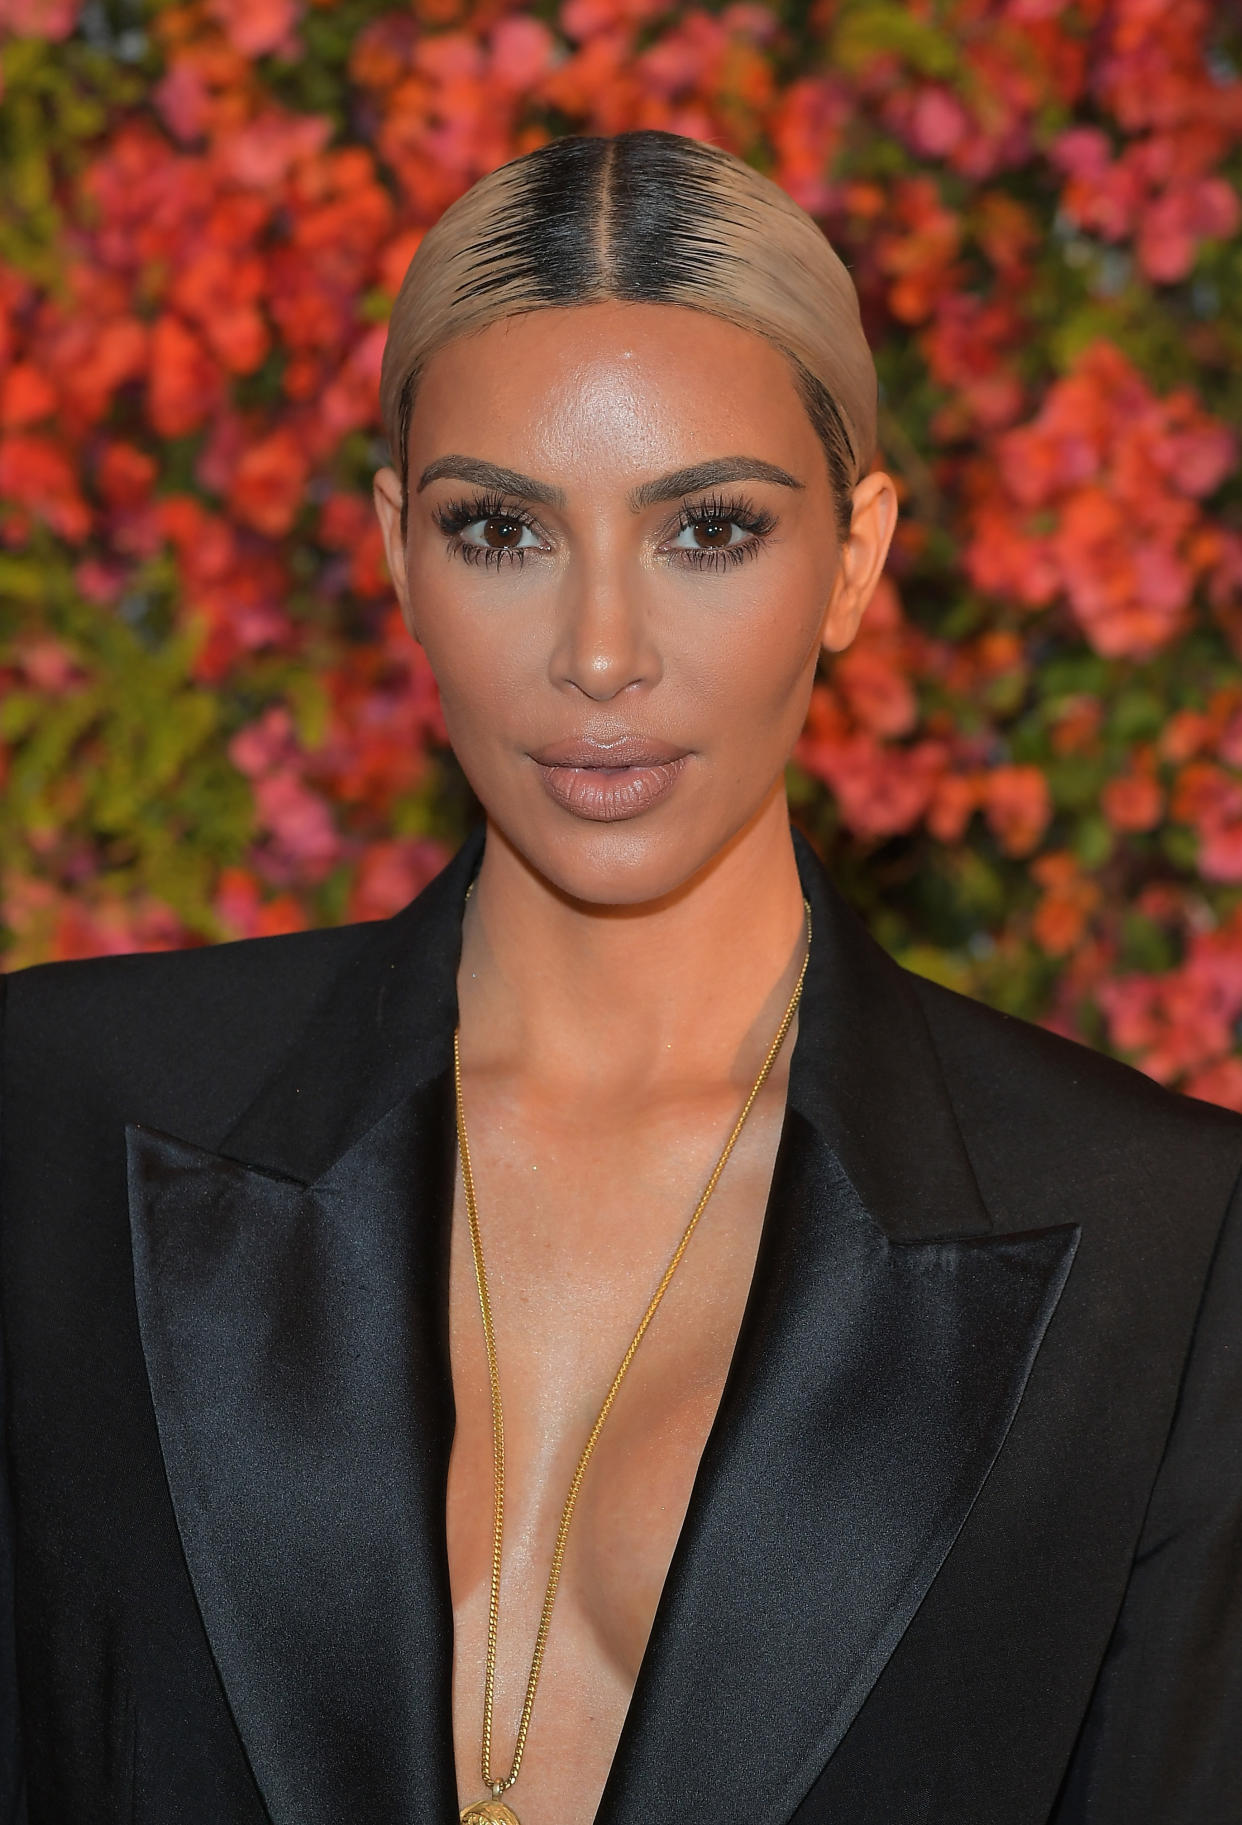 Kim Kardashian has inspired a body-positive activist to open up about how people of different shapes are treated. (Photo: Charley Gallay/Getty Images for Bumble)